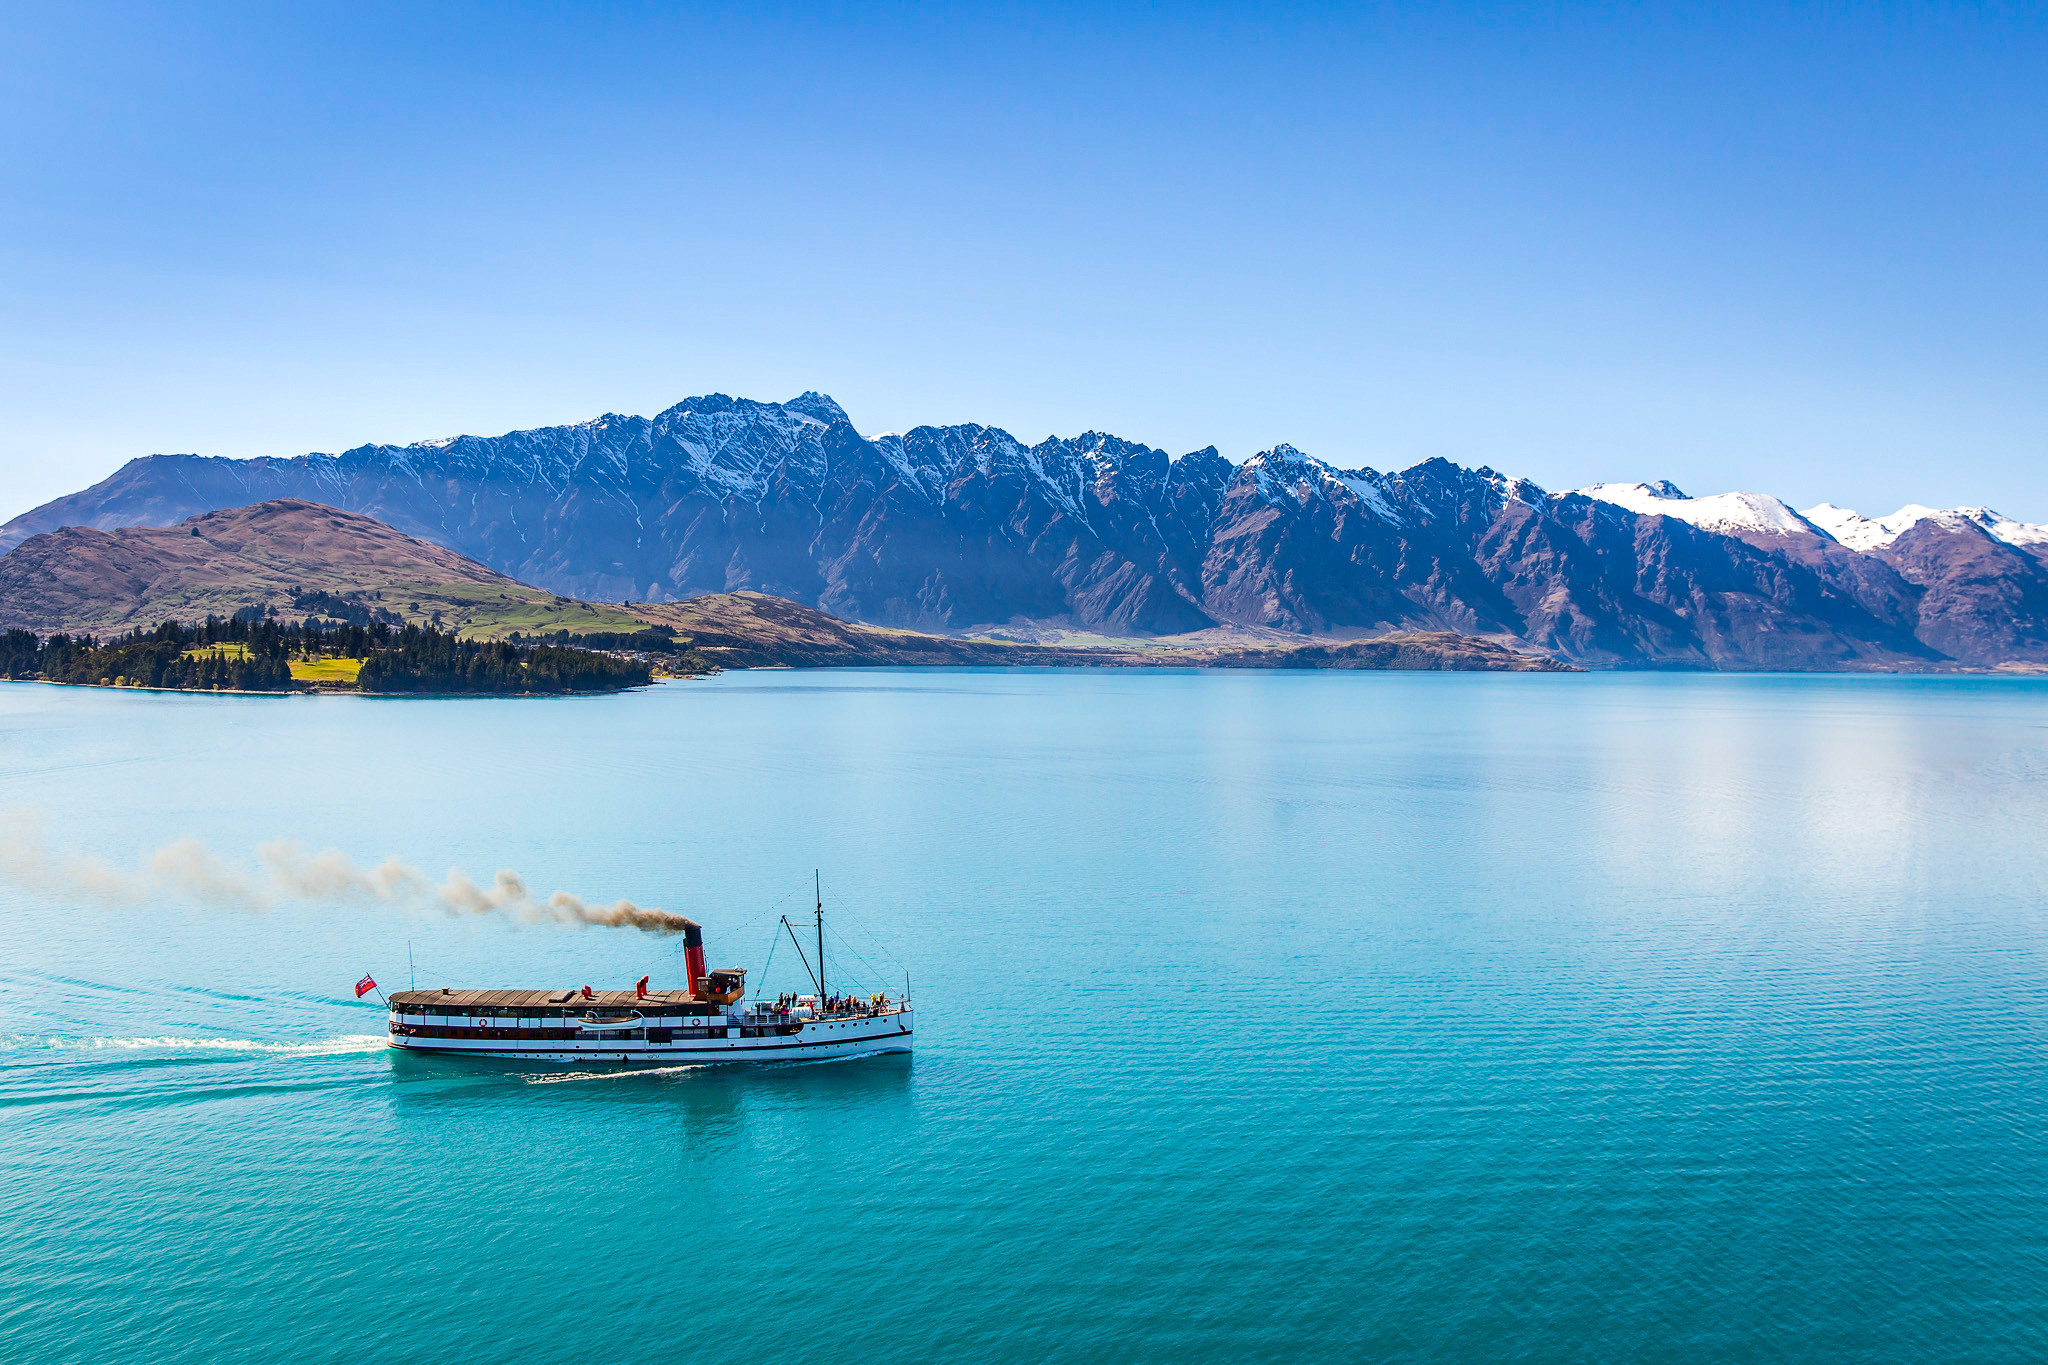 Coming to Queenstown, New Zealand, visitors just need to 'choose at ...